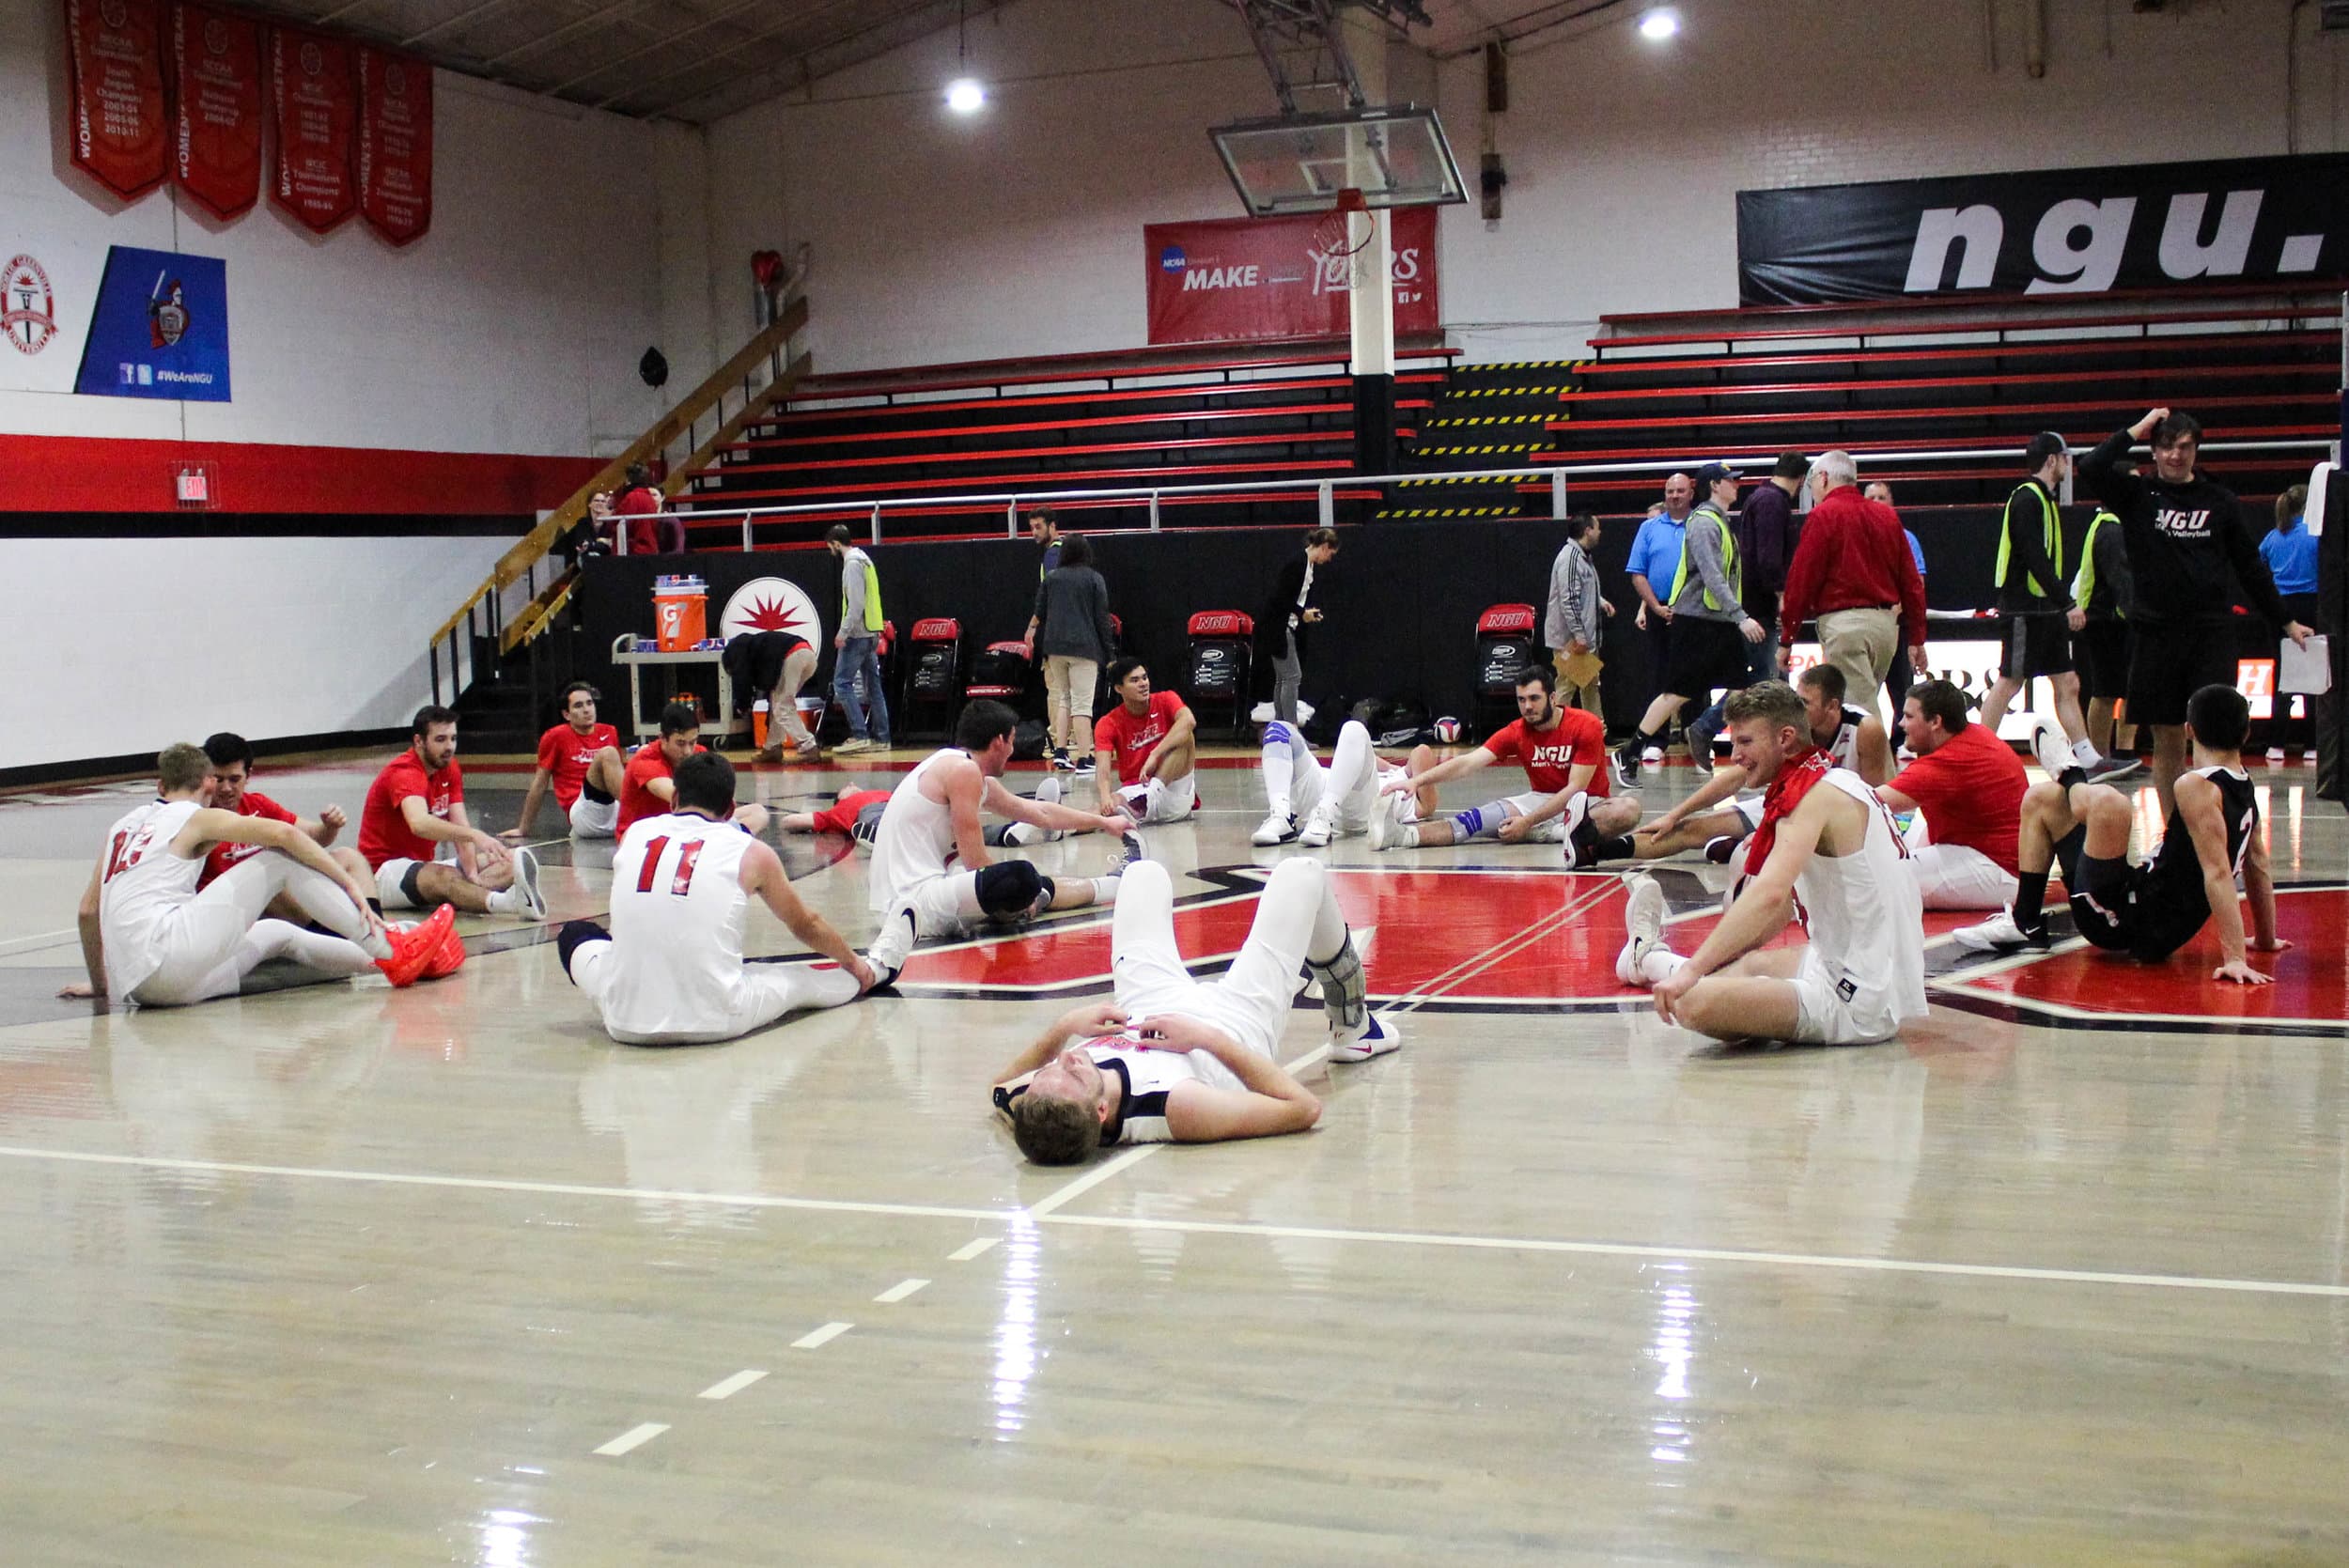 After all five sets, the team sits on the ground to stretch.